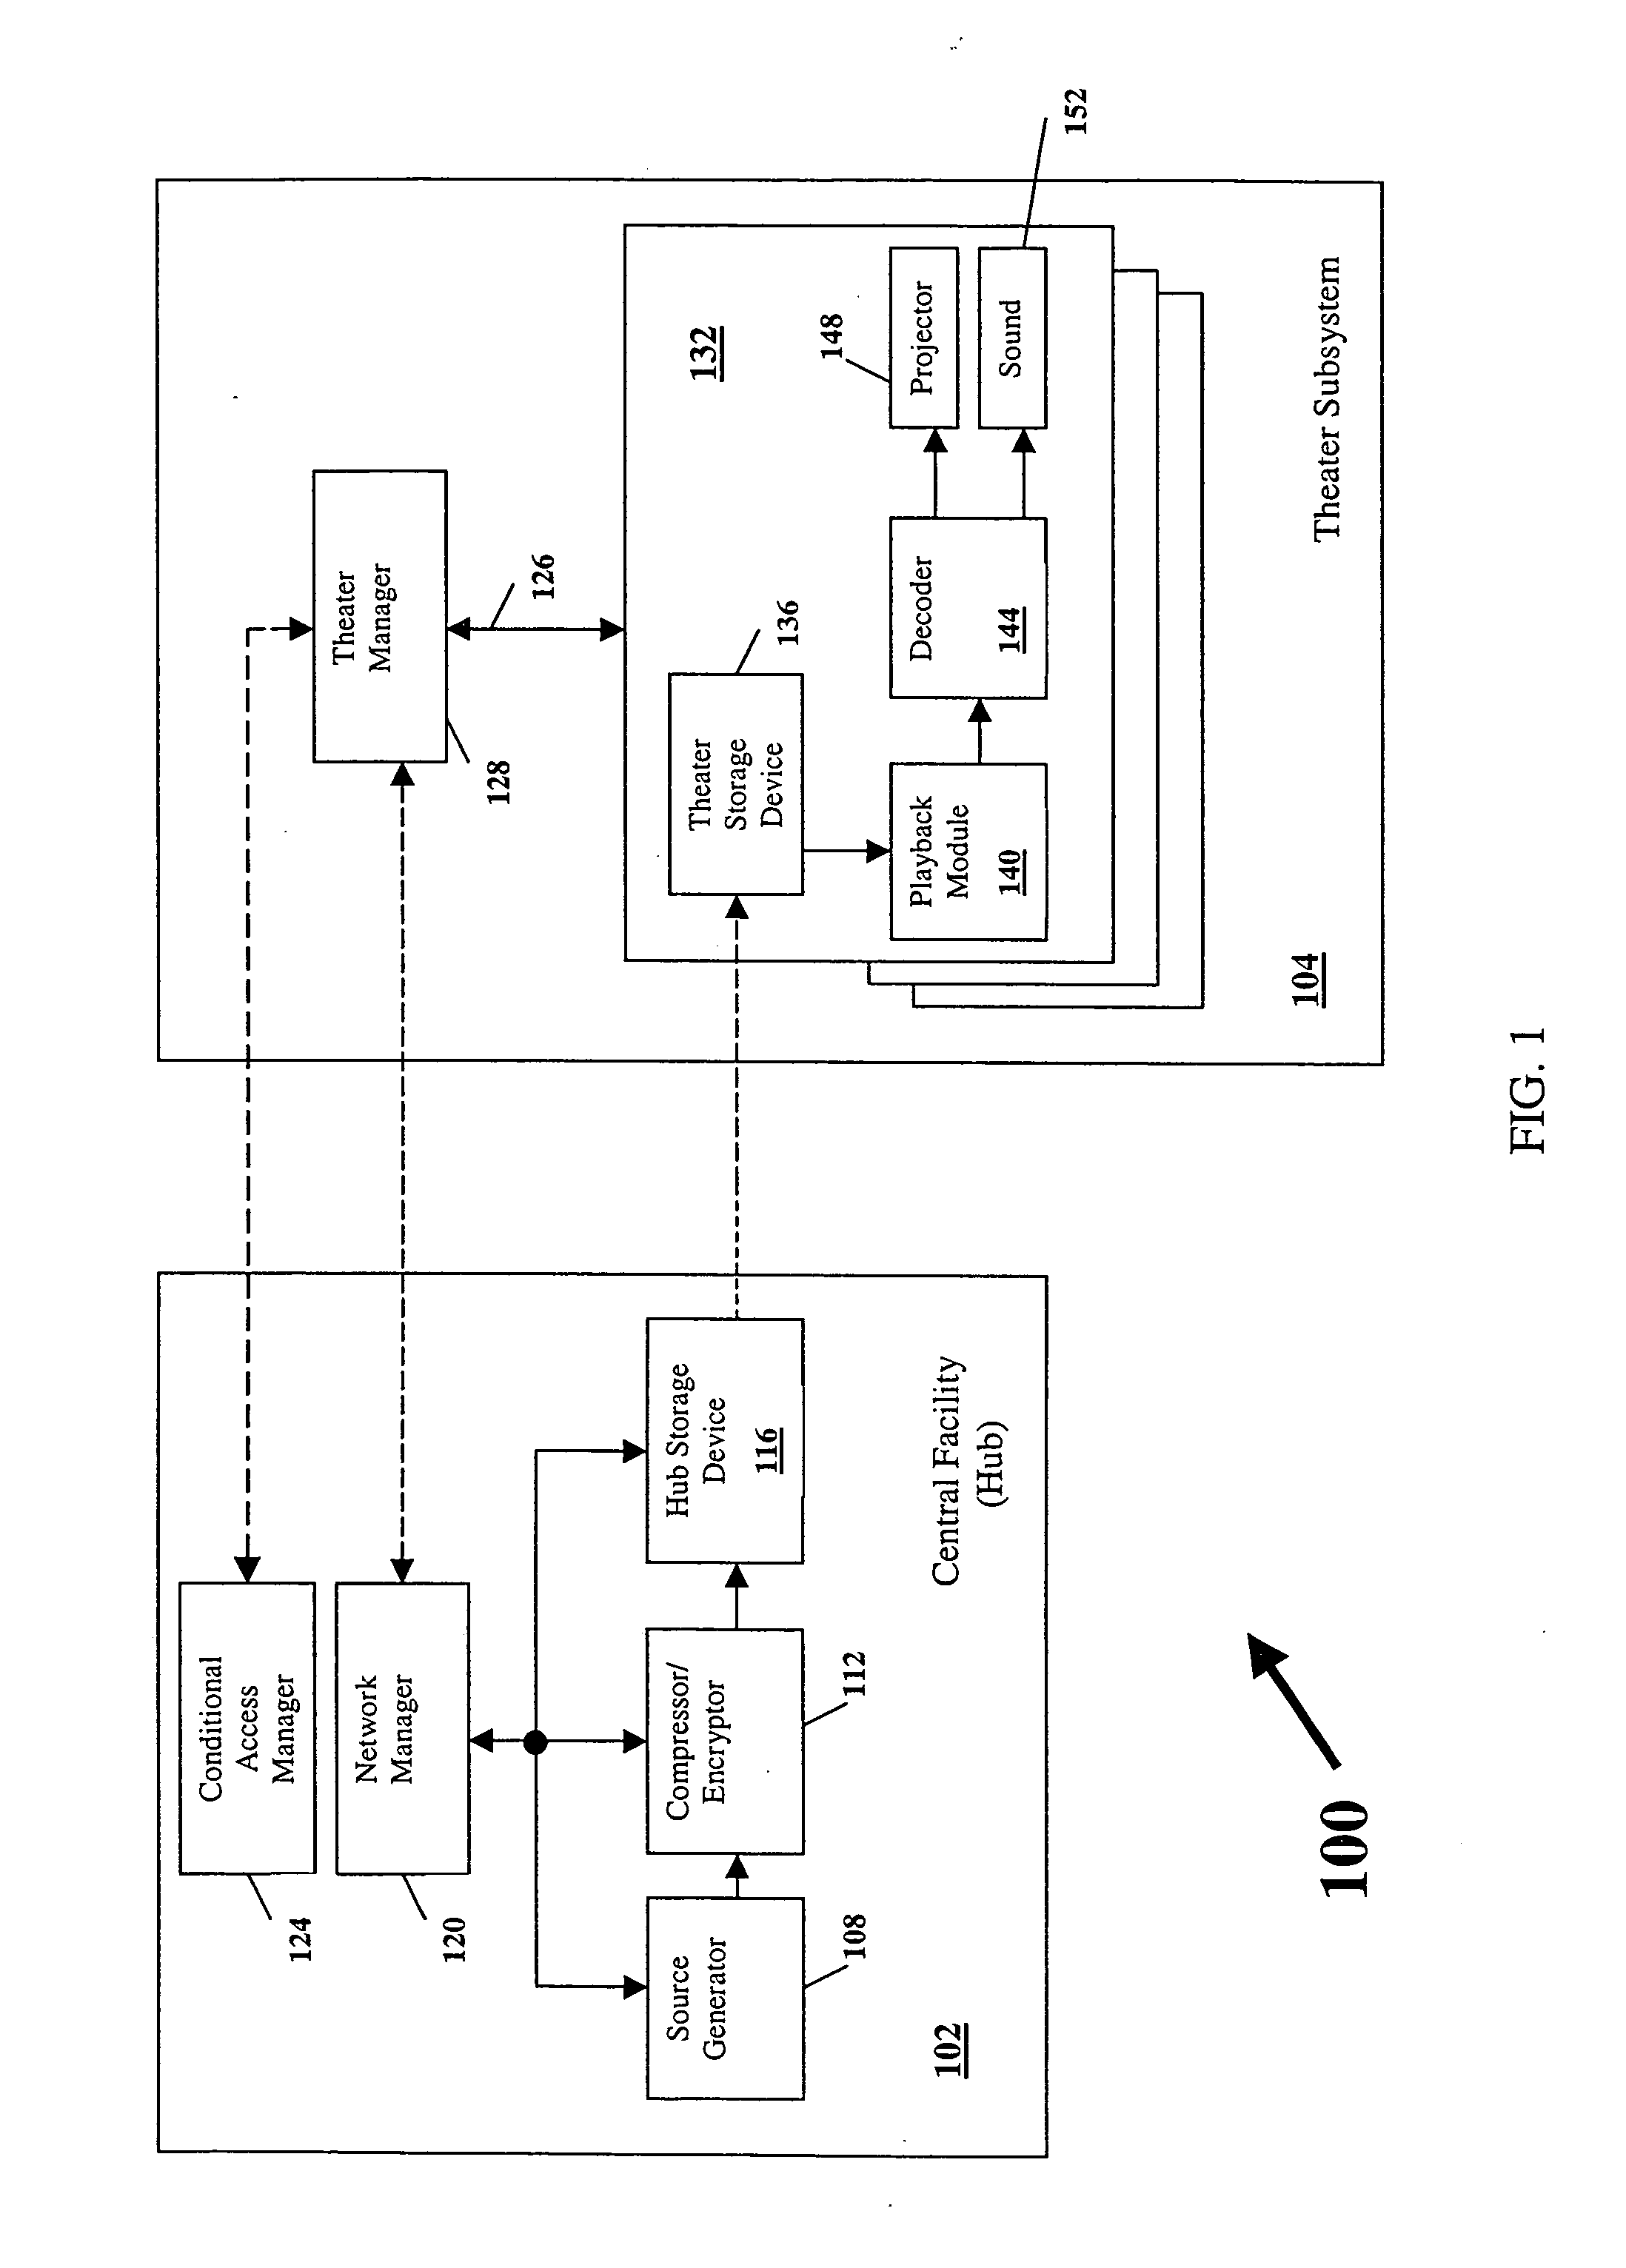 Apparatus and method for watermarking a digital image